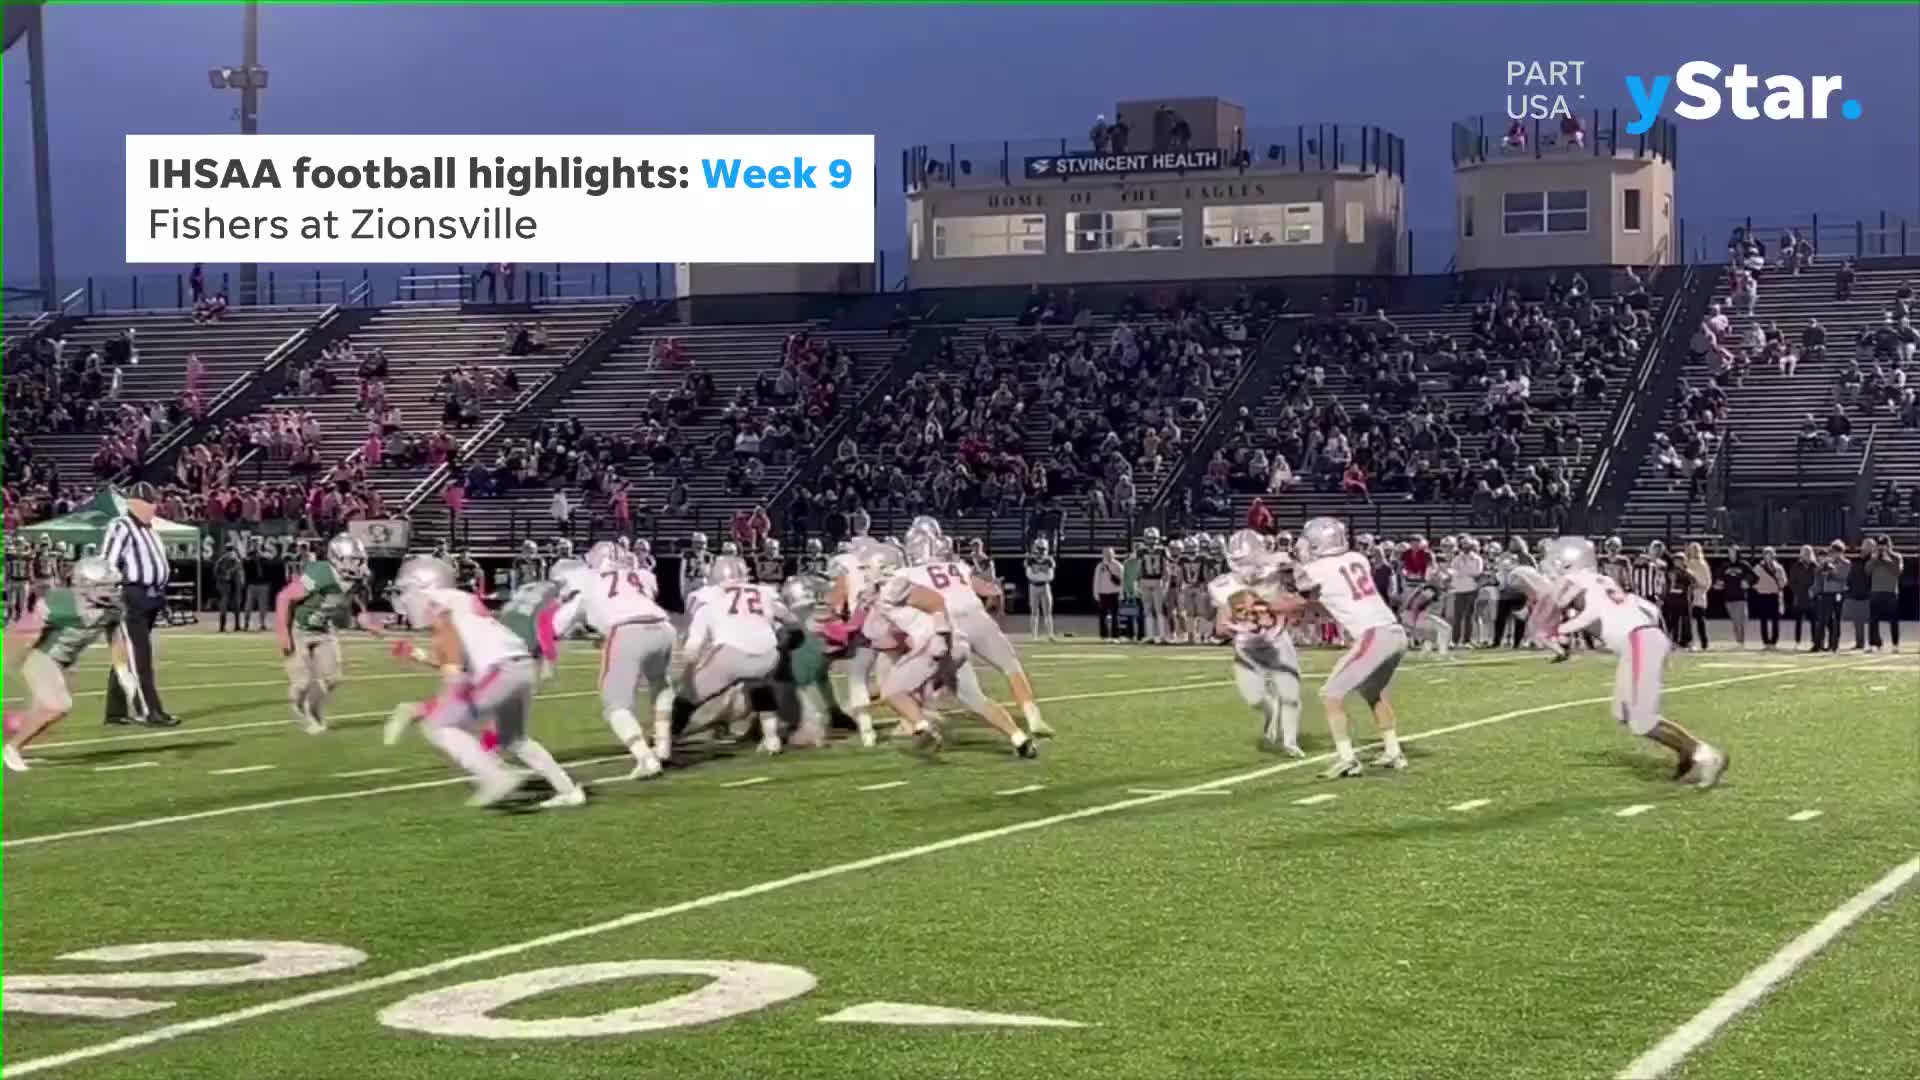 atlet Fremragende Twisted IHSAA football highlights: Fishers 37, Zionsville 7